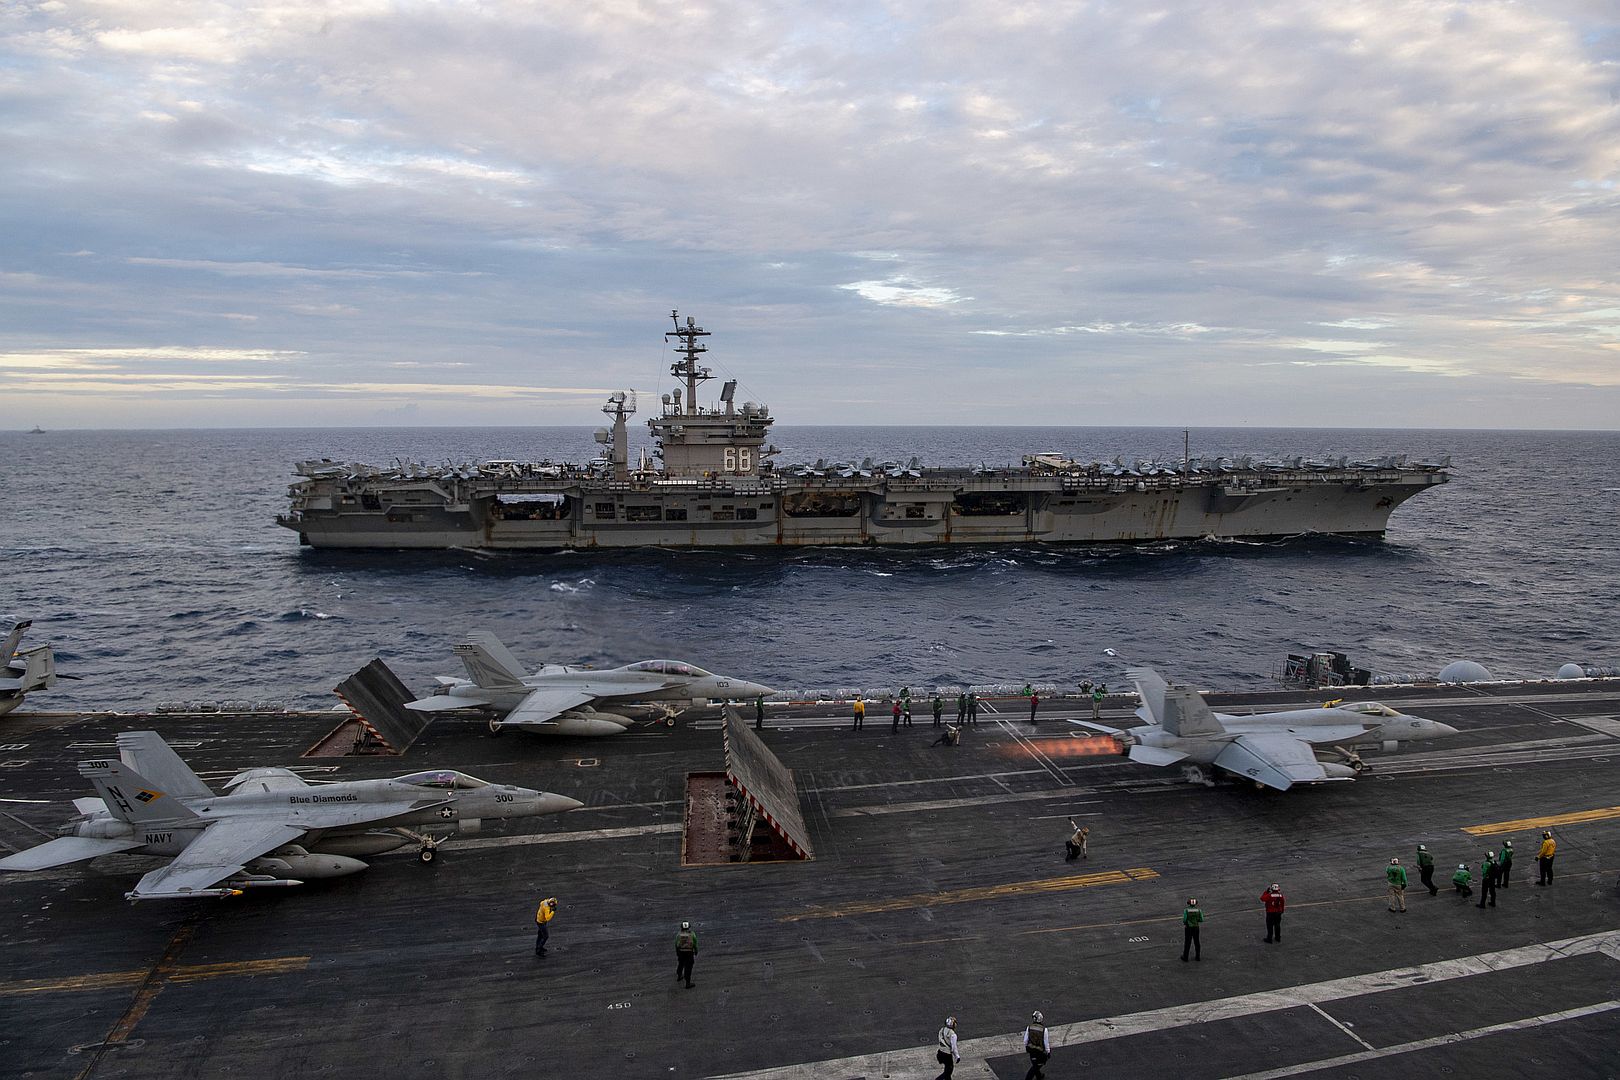  Launches From The Flight Deck Of The Aircraft Carrier USS Theodore Roosevelt